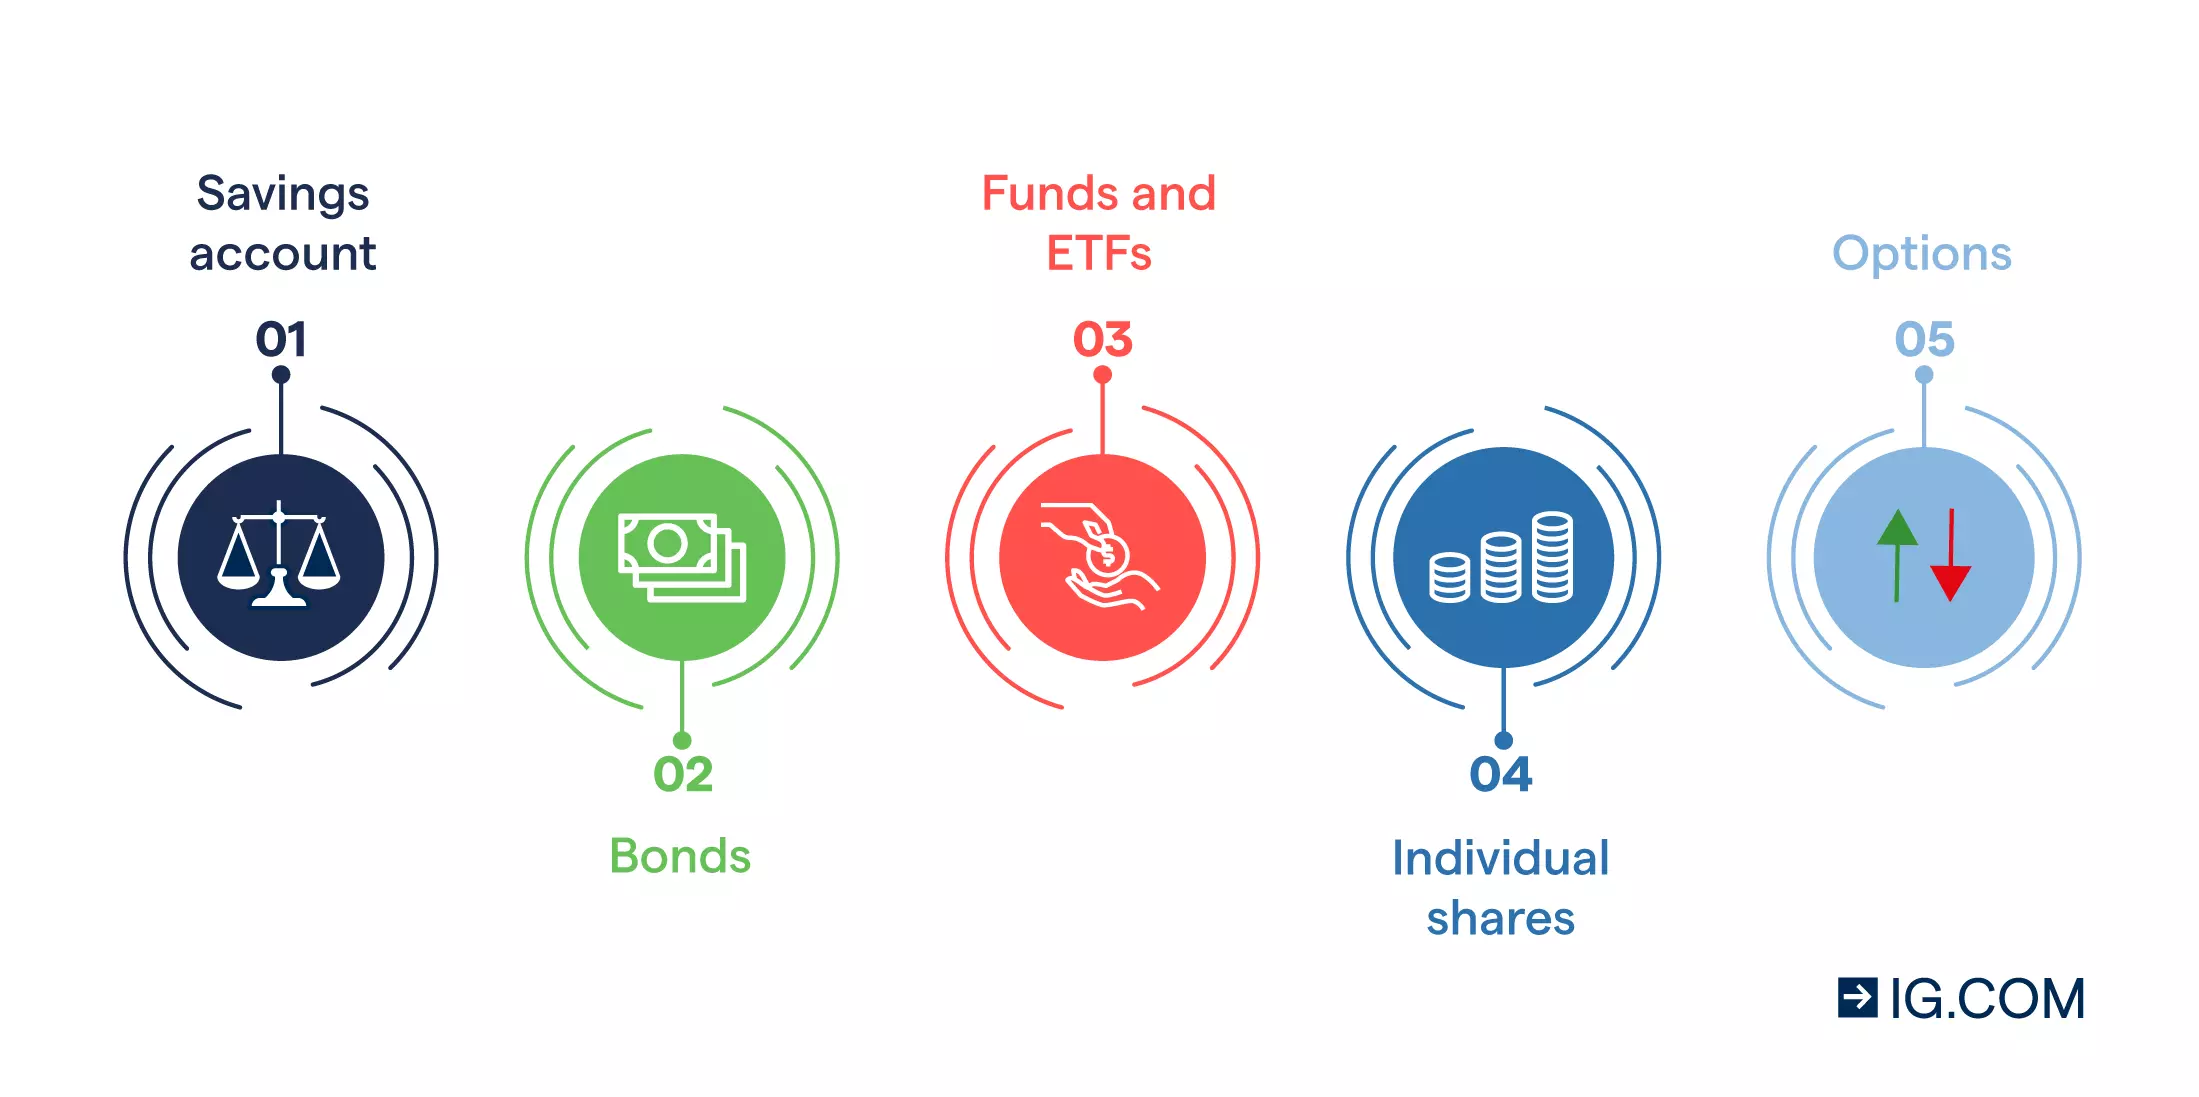 Visual depicting five kinds of financial products and instruments, such as: a savings account, bonds, funds and ETFs, individual shares and options.